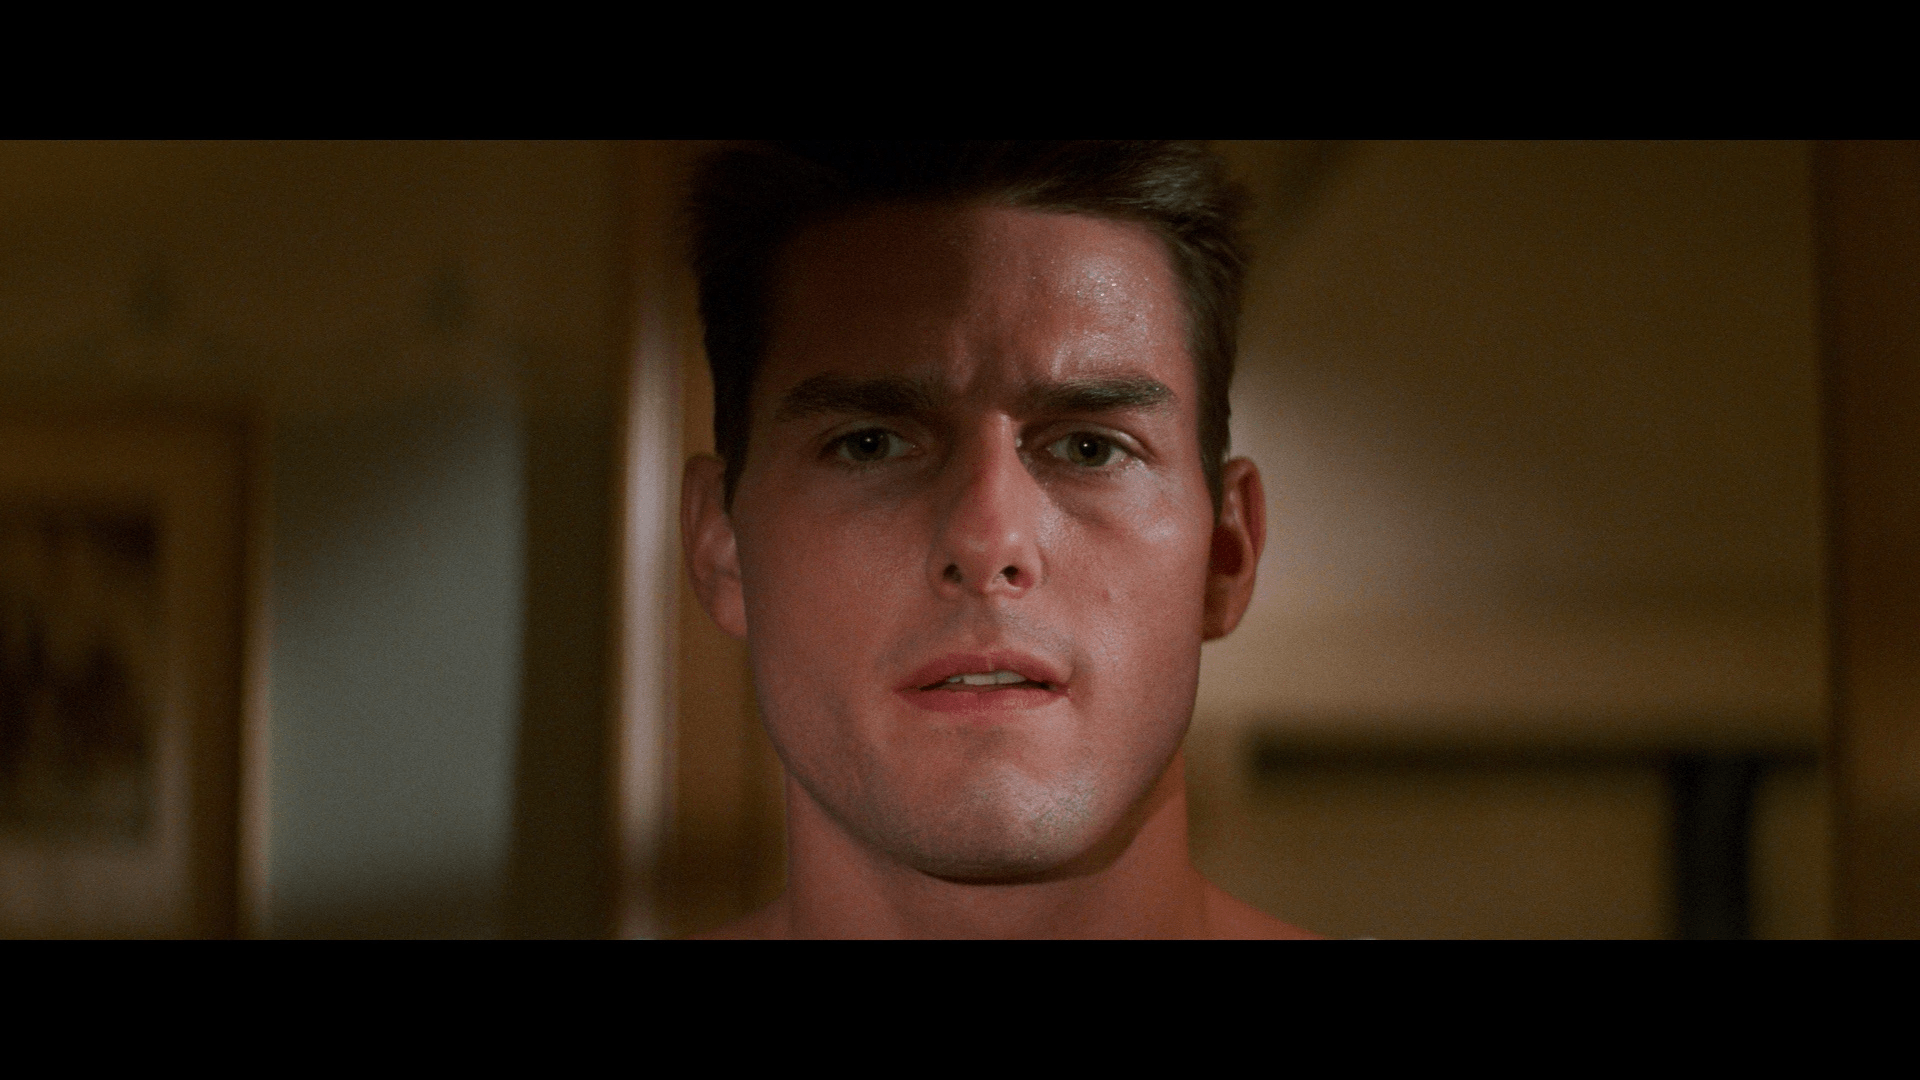 Mission Impossible turns 25 with an improved Blu-ray [Review] 3